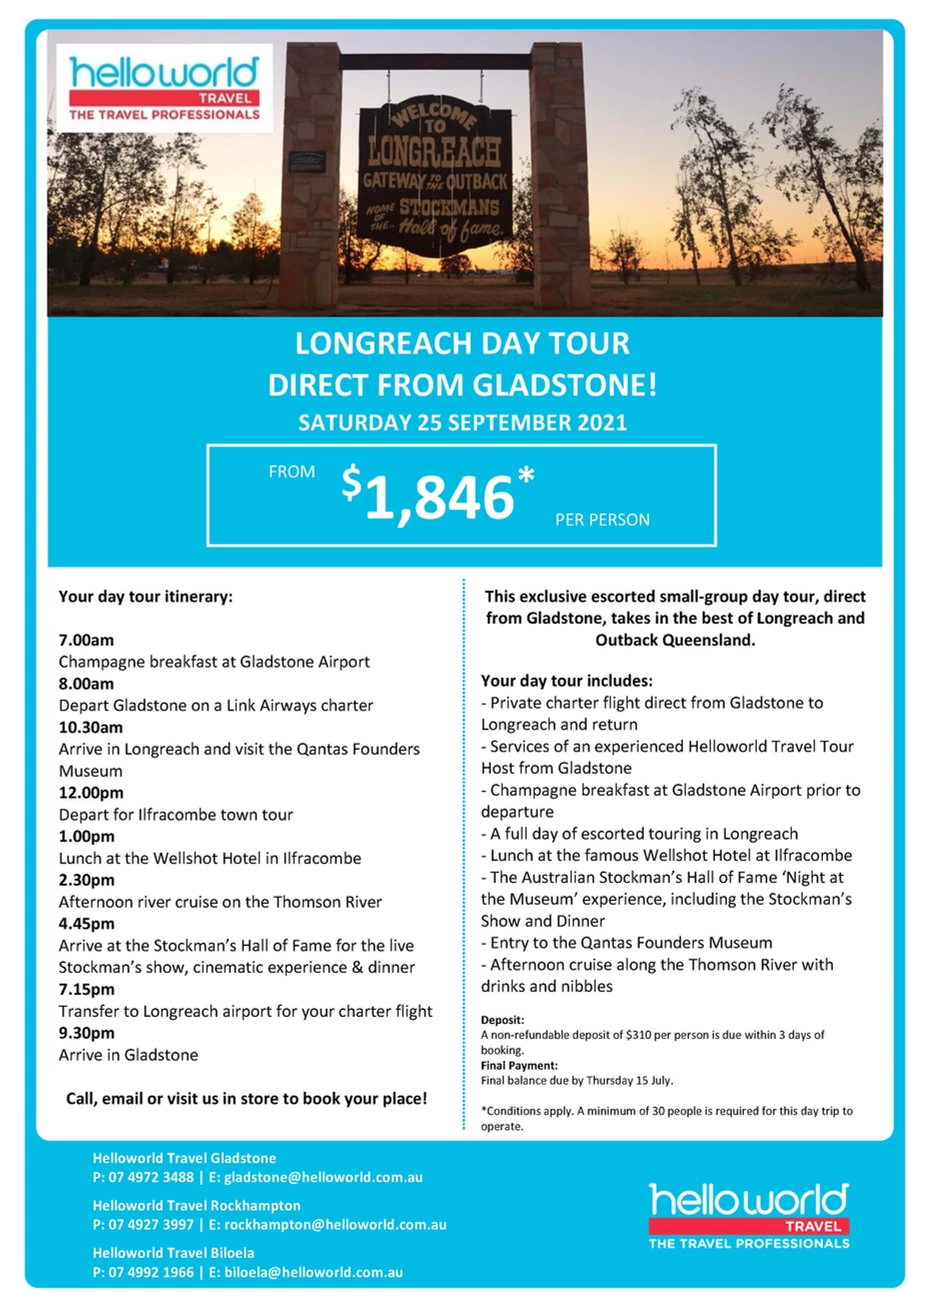 Longreach Day Tour Direct From Gladstone!